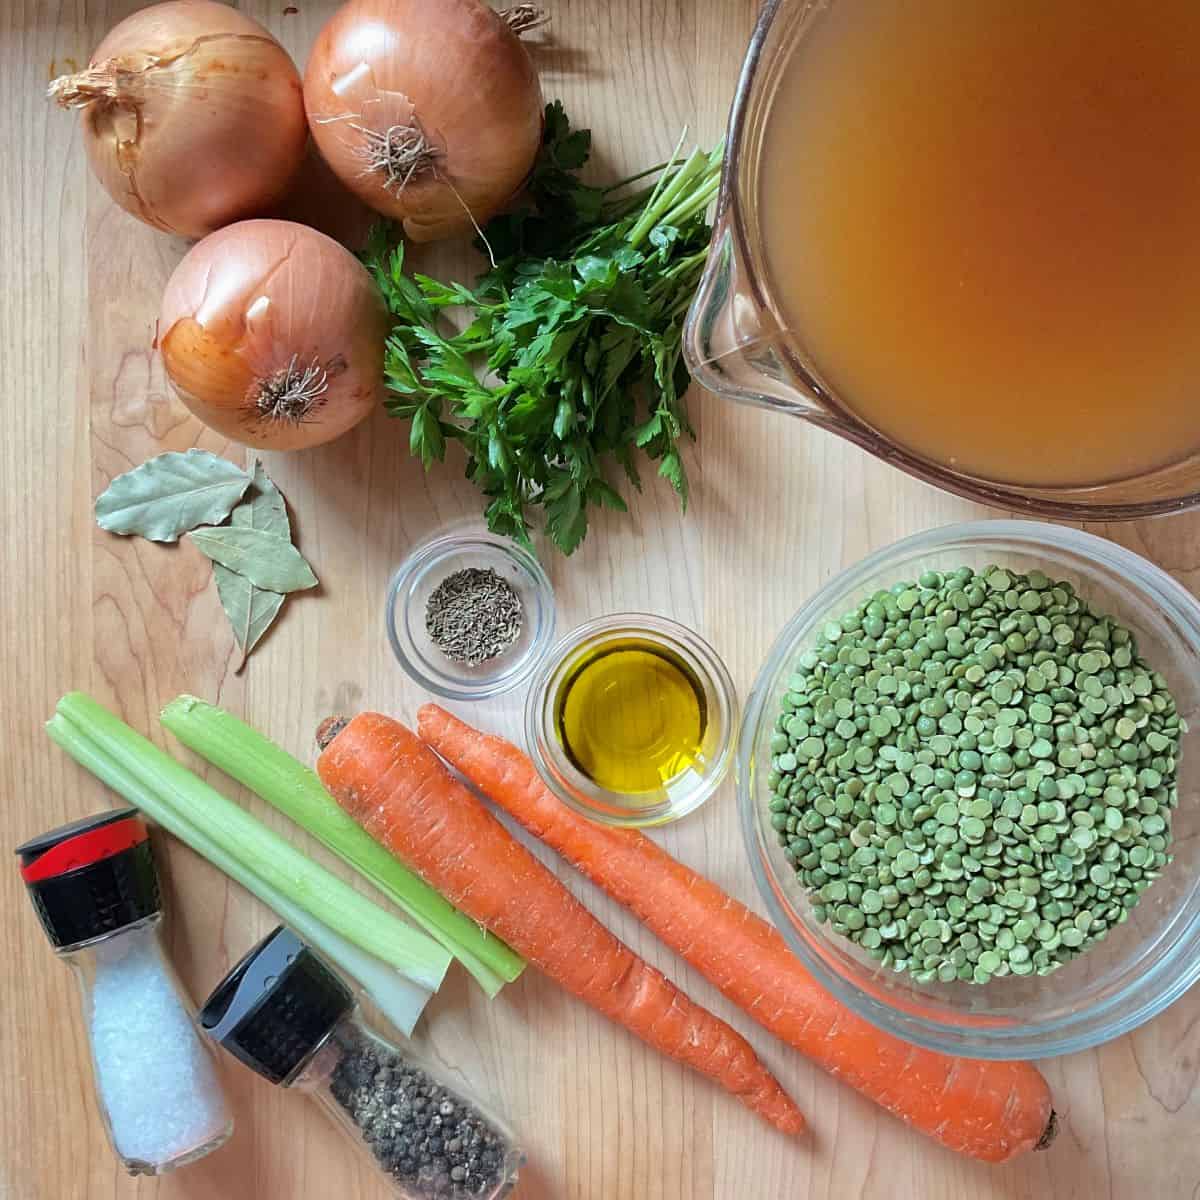 The ingredients to make a vegetarian pea soup on a wooden surface.